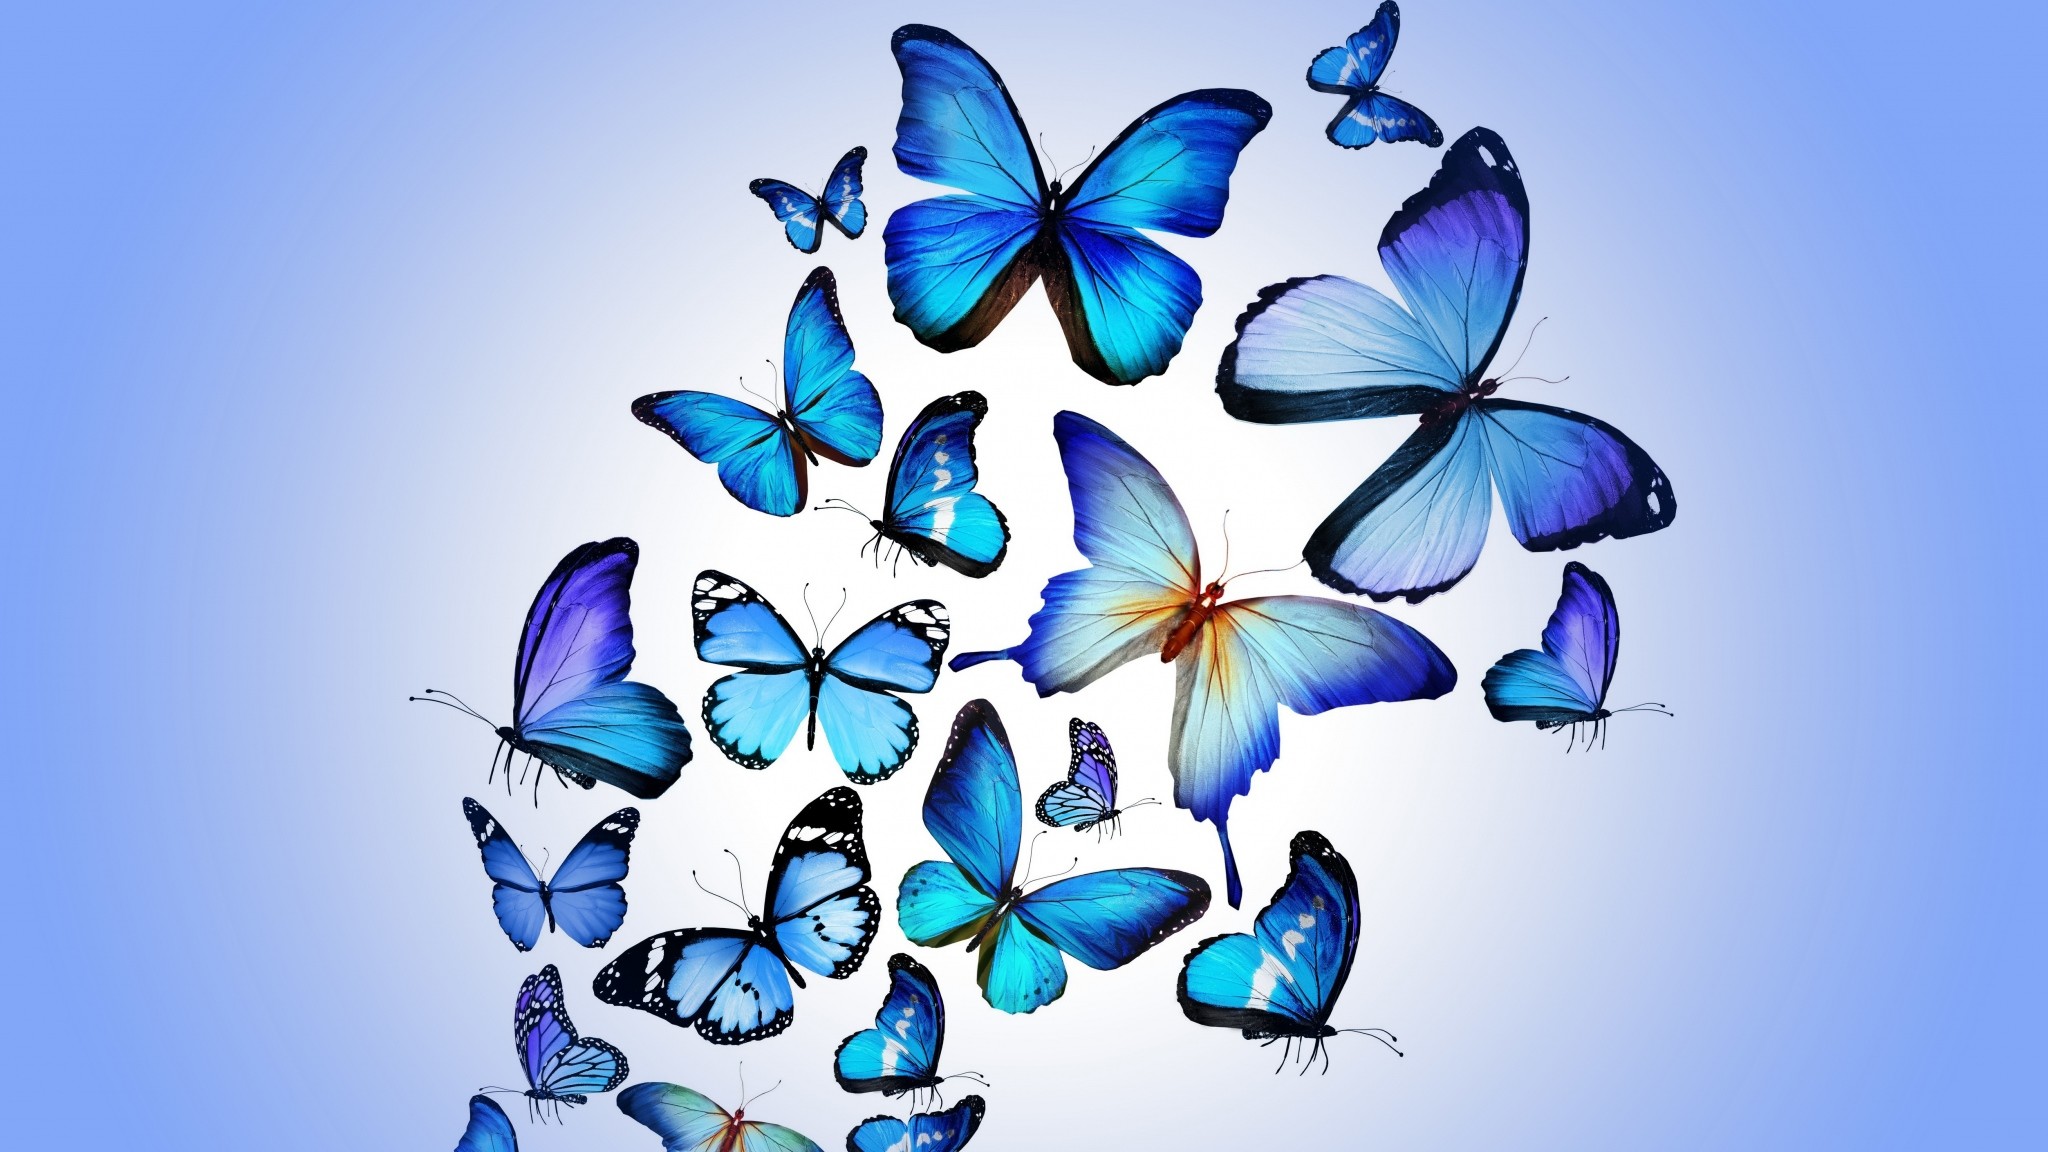 2048x1152 Download Free High Quality Butterfly Wallpaper The Quotes Land 1920Ã1200  Butterfly Picture | Adorable Wallpapers | Desktop | Pinterest | Butterfly  wallpaper ...